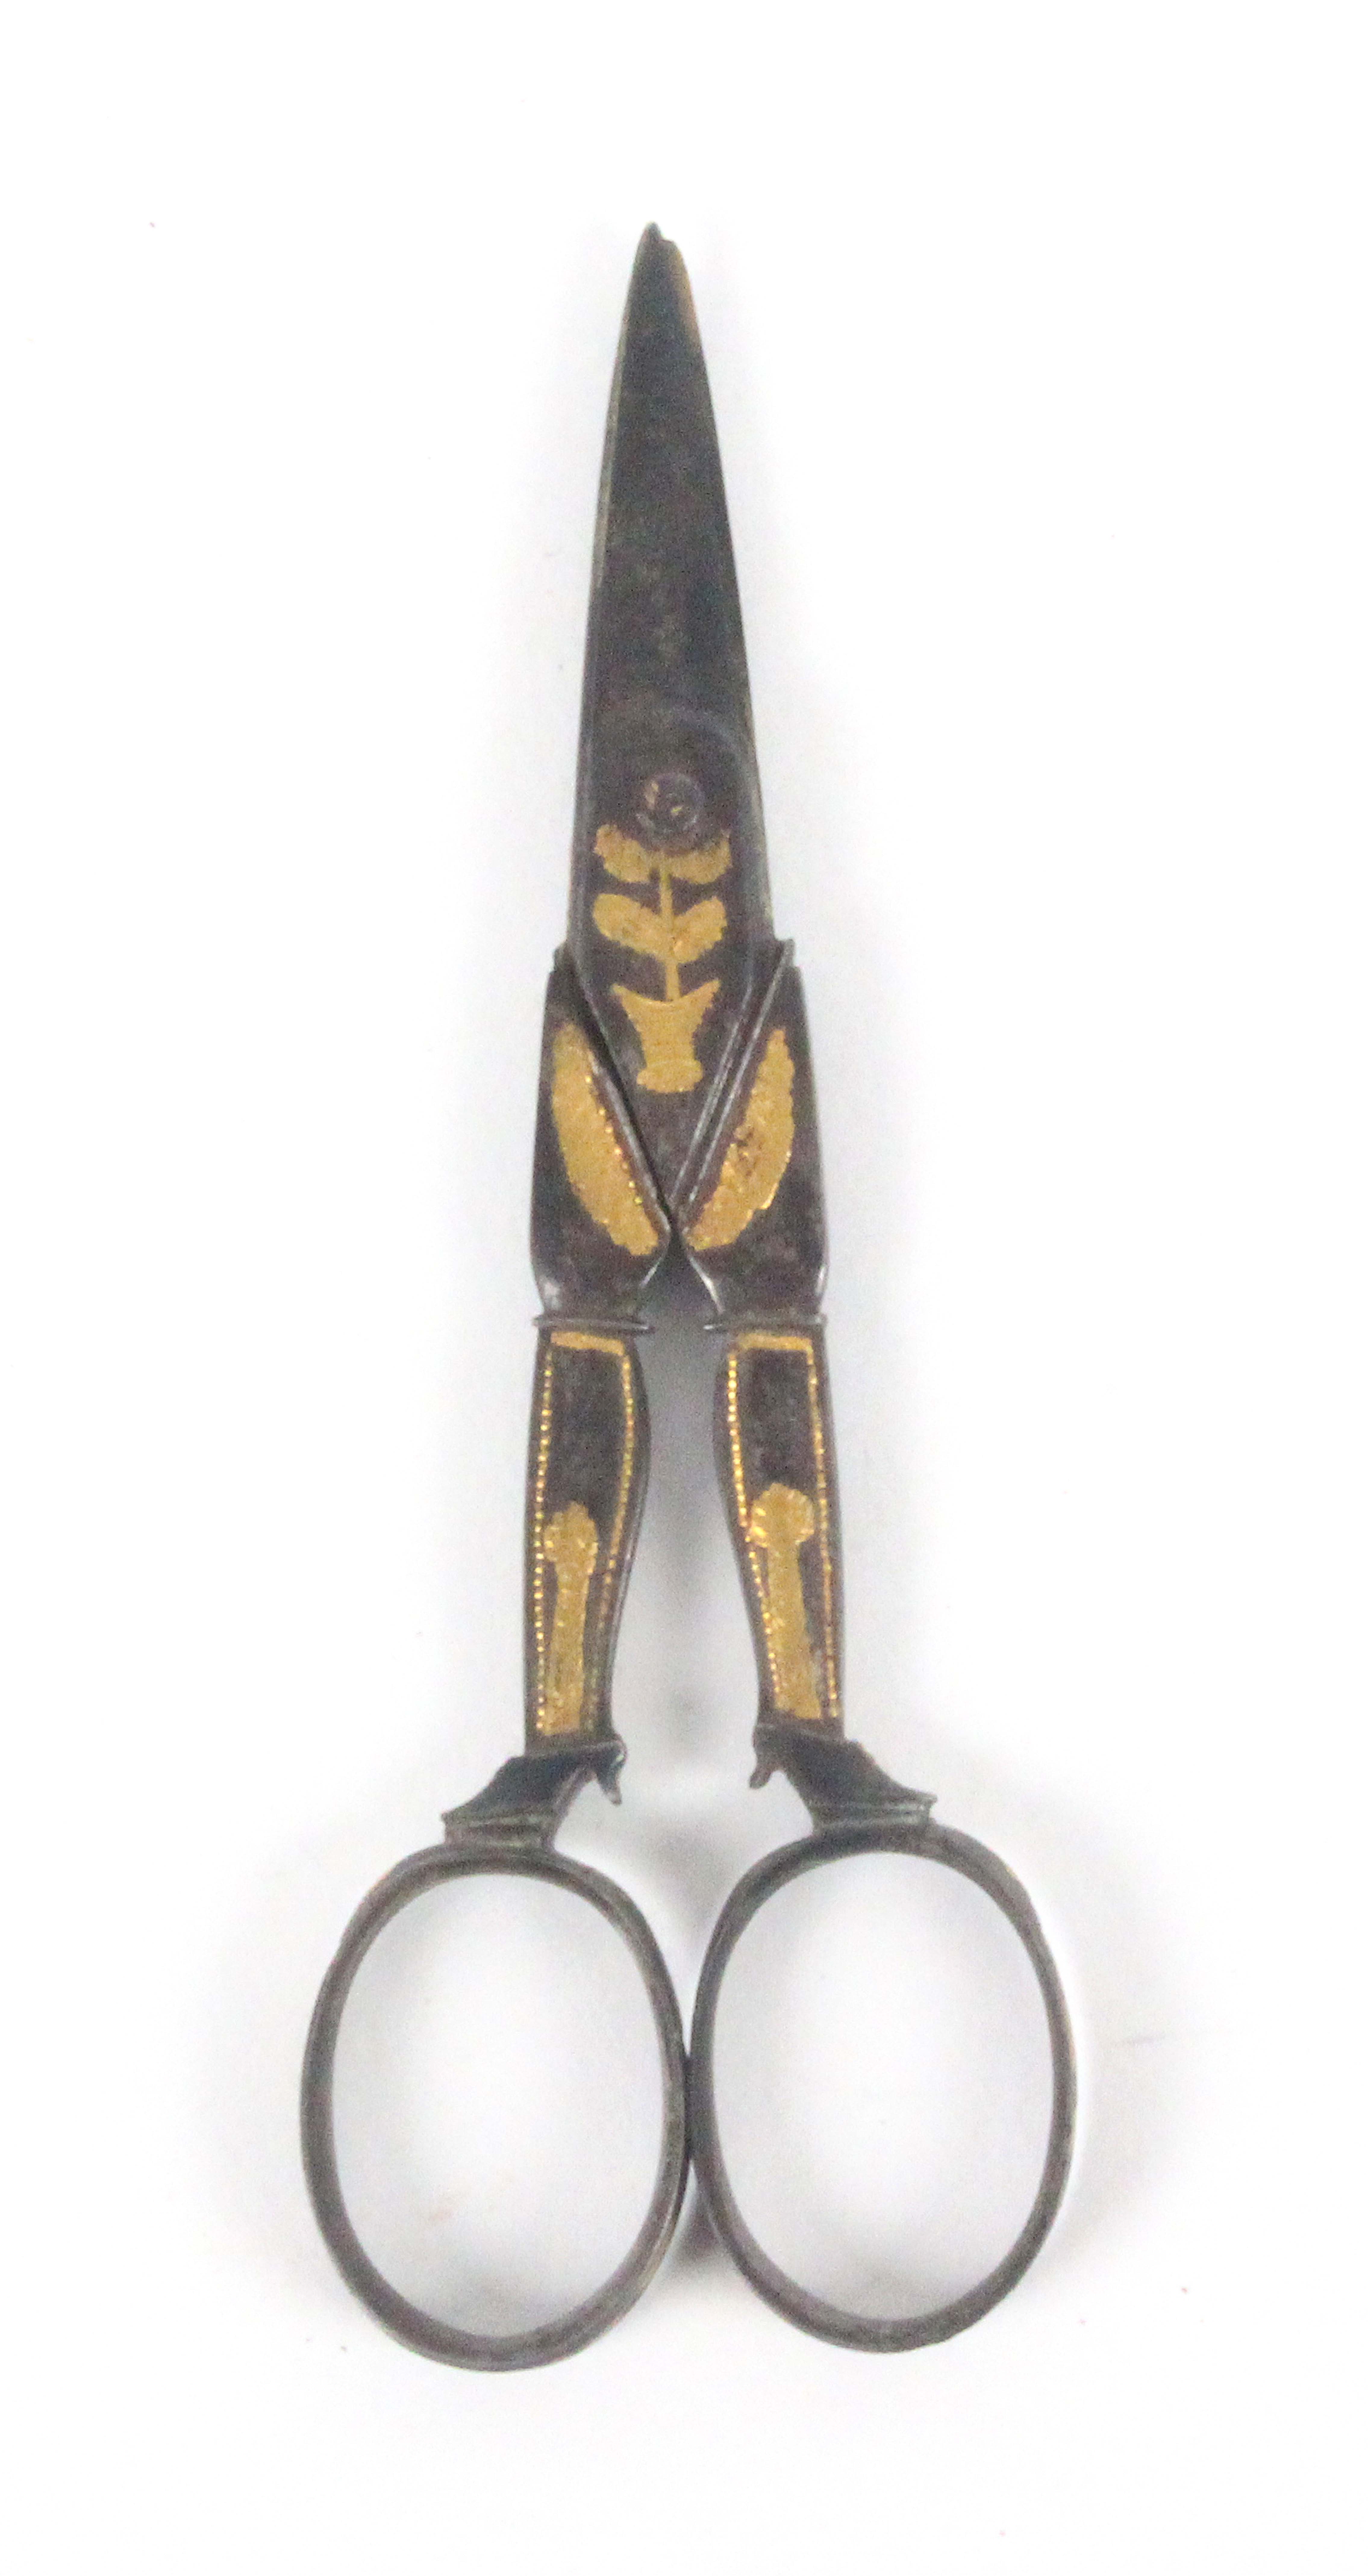 A pair of late 18th Century gold mounted steel scissors, English or French, short tapering blades